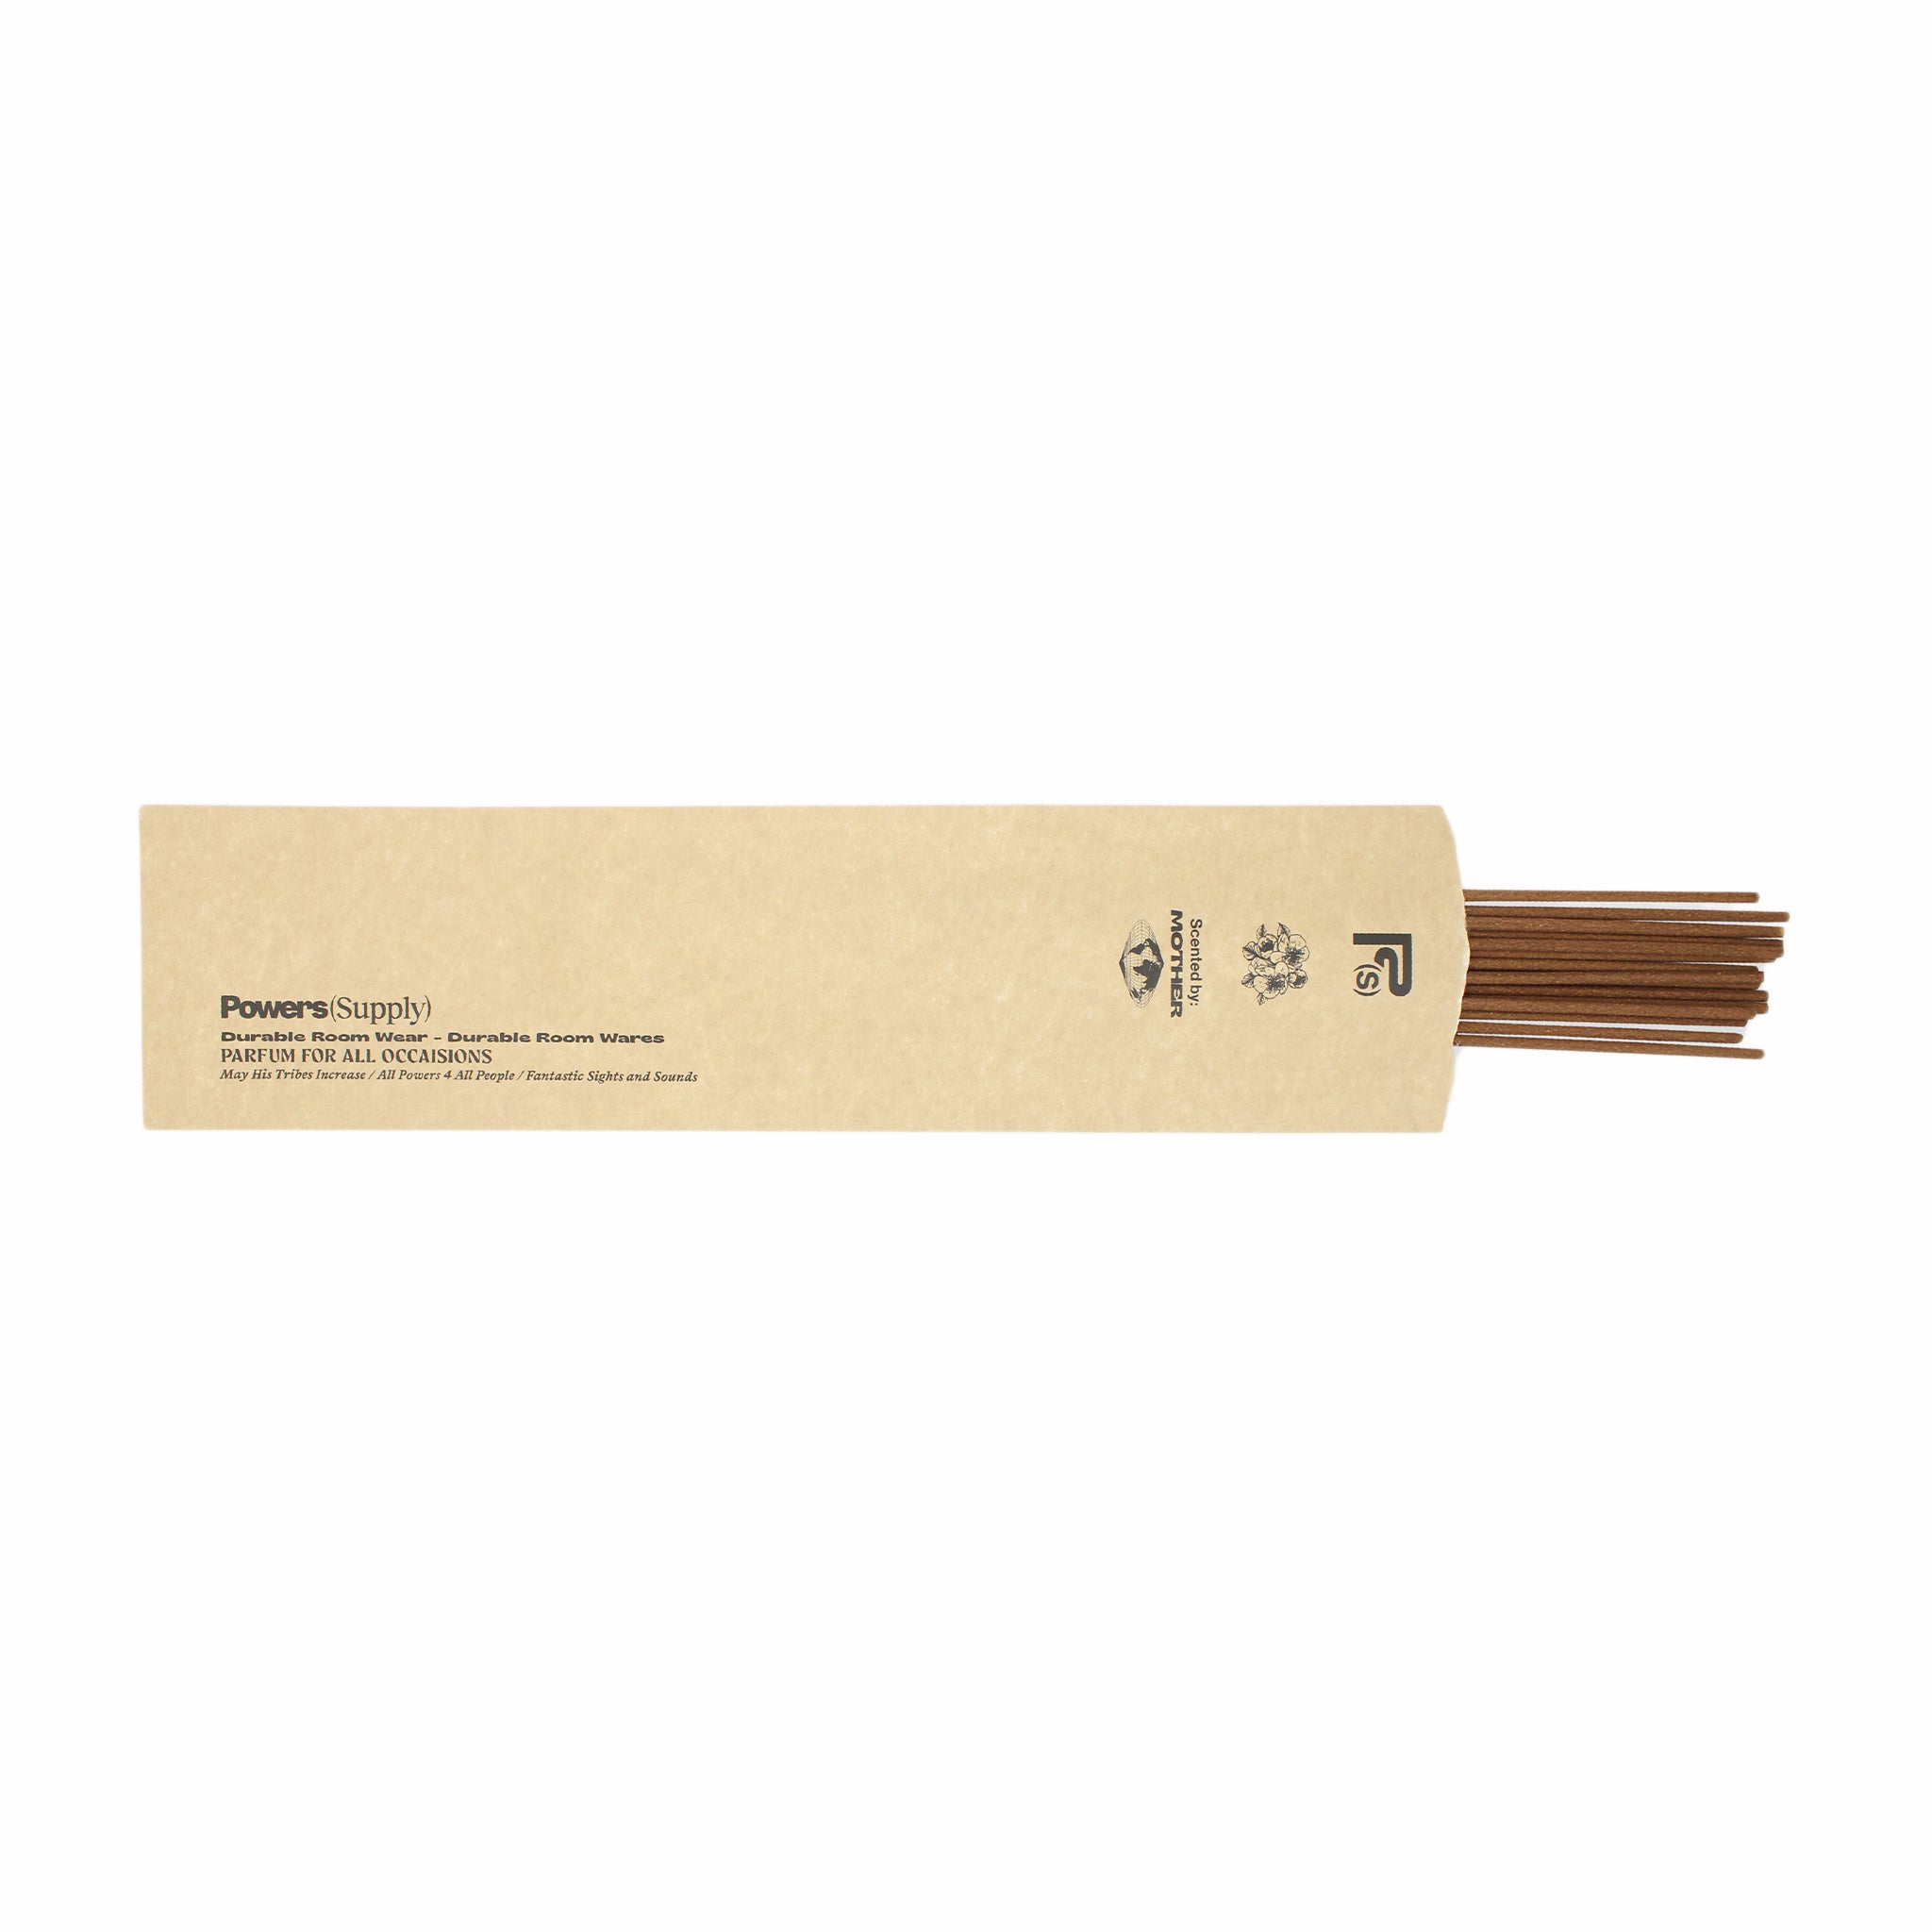 Powers Supply Incense - August Shop